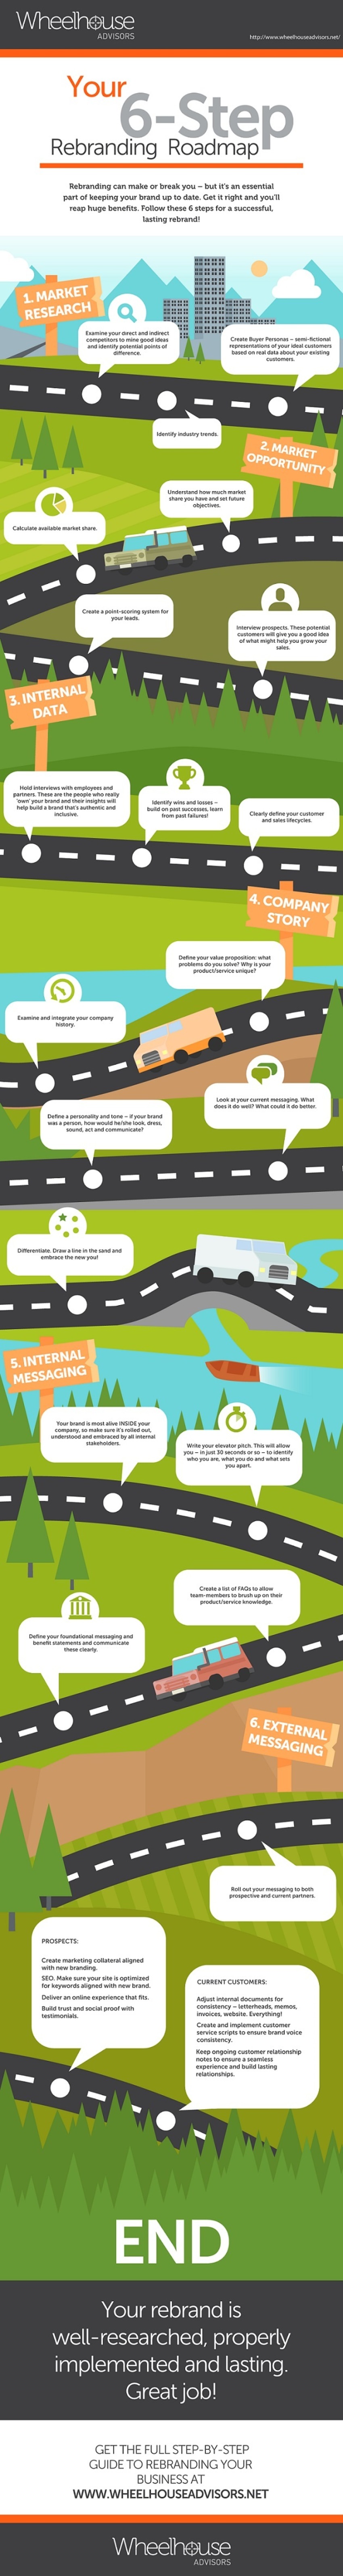 Your Six-Step Road Map to Rebranding [Infographic] - Profs | The MarTech Digest | Scoop.it